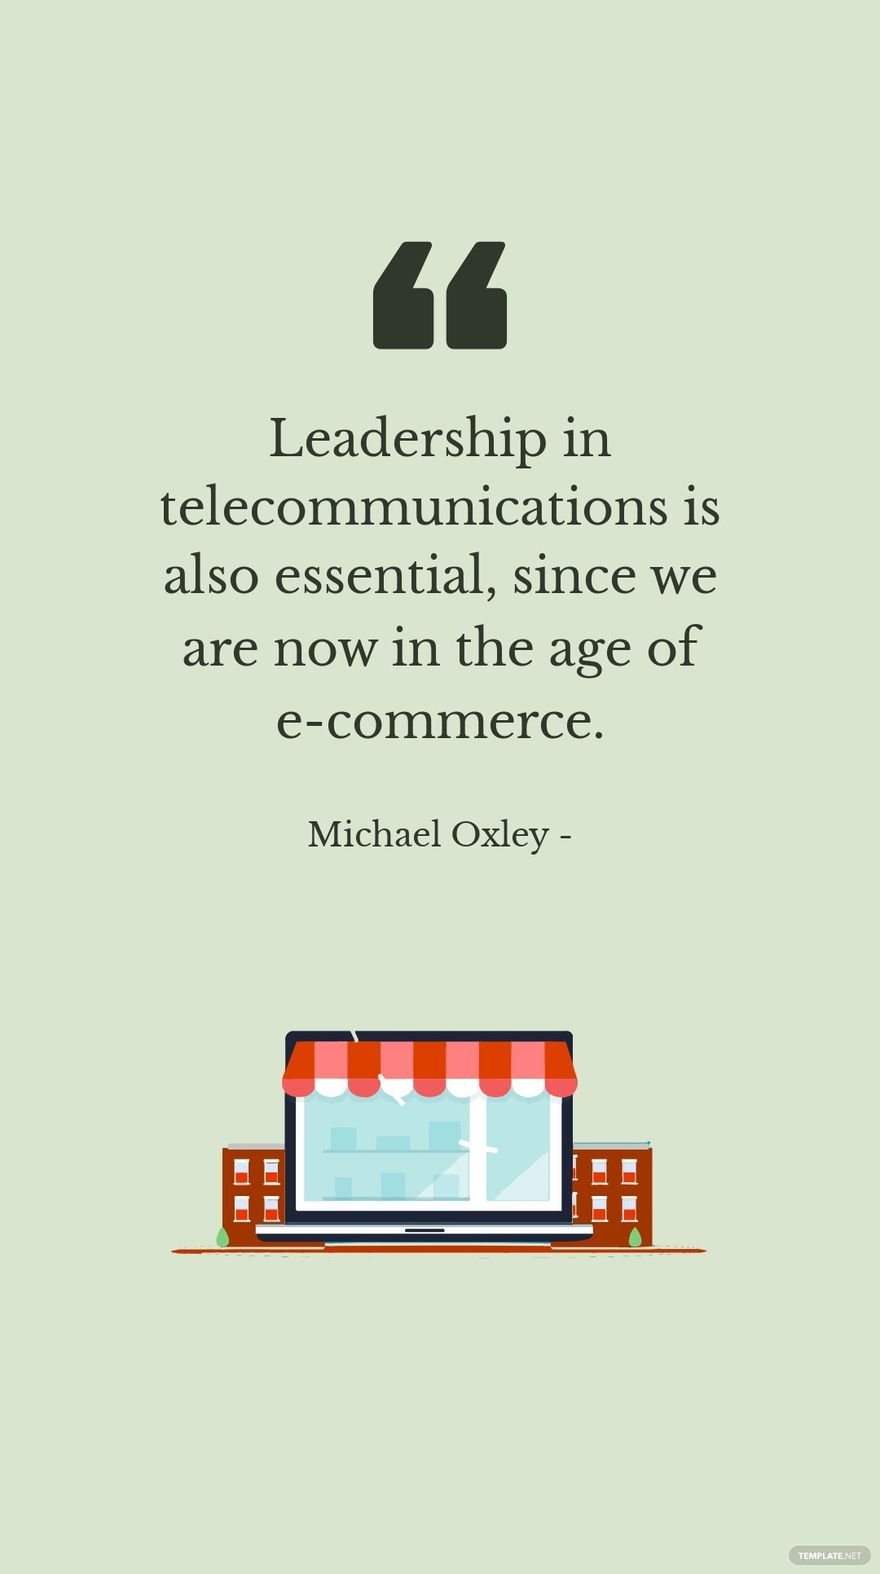 Michael Oxley - Leadership in telecommunications is also essential, since we are now in the age of e-commerce.